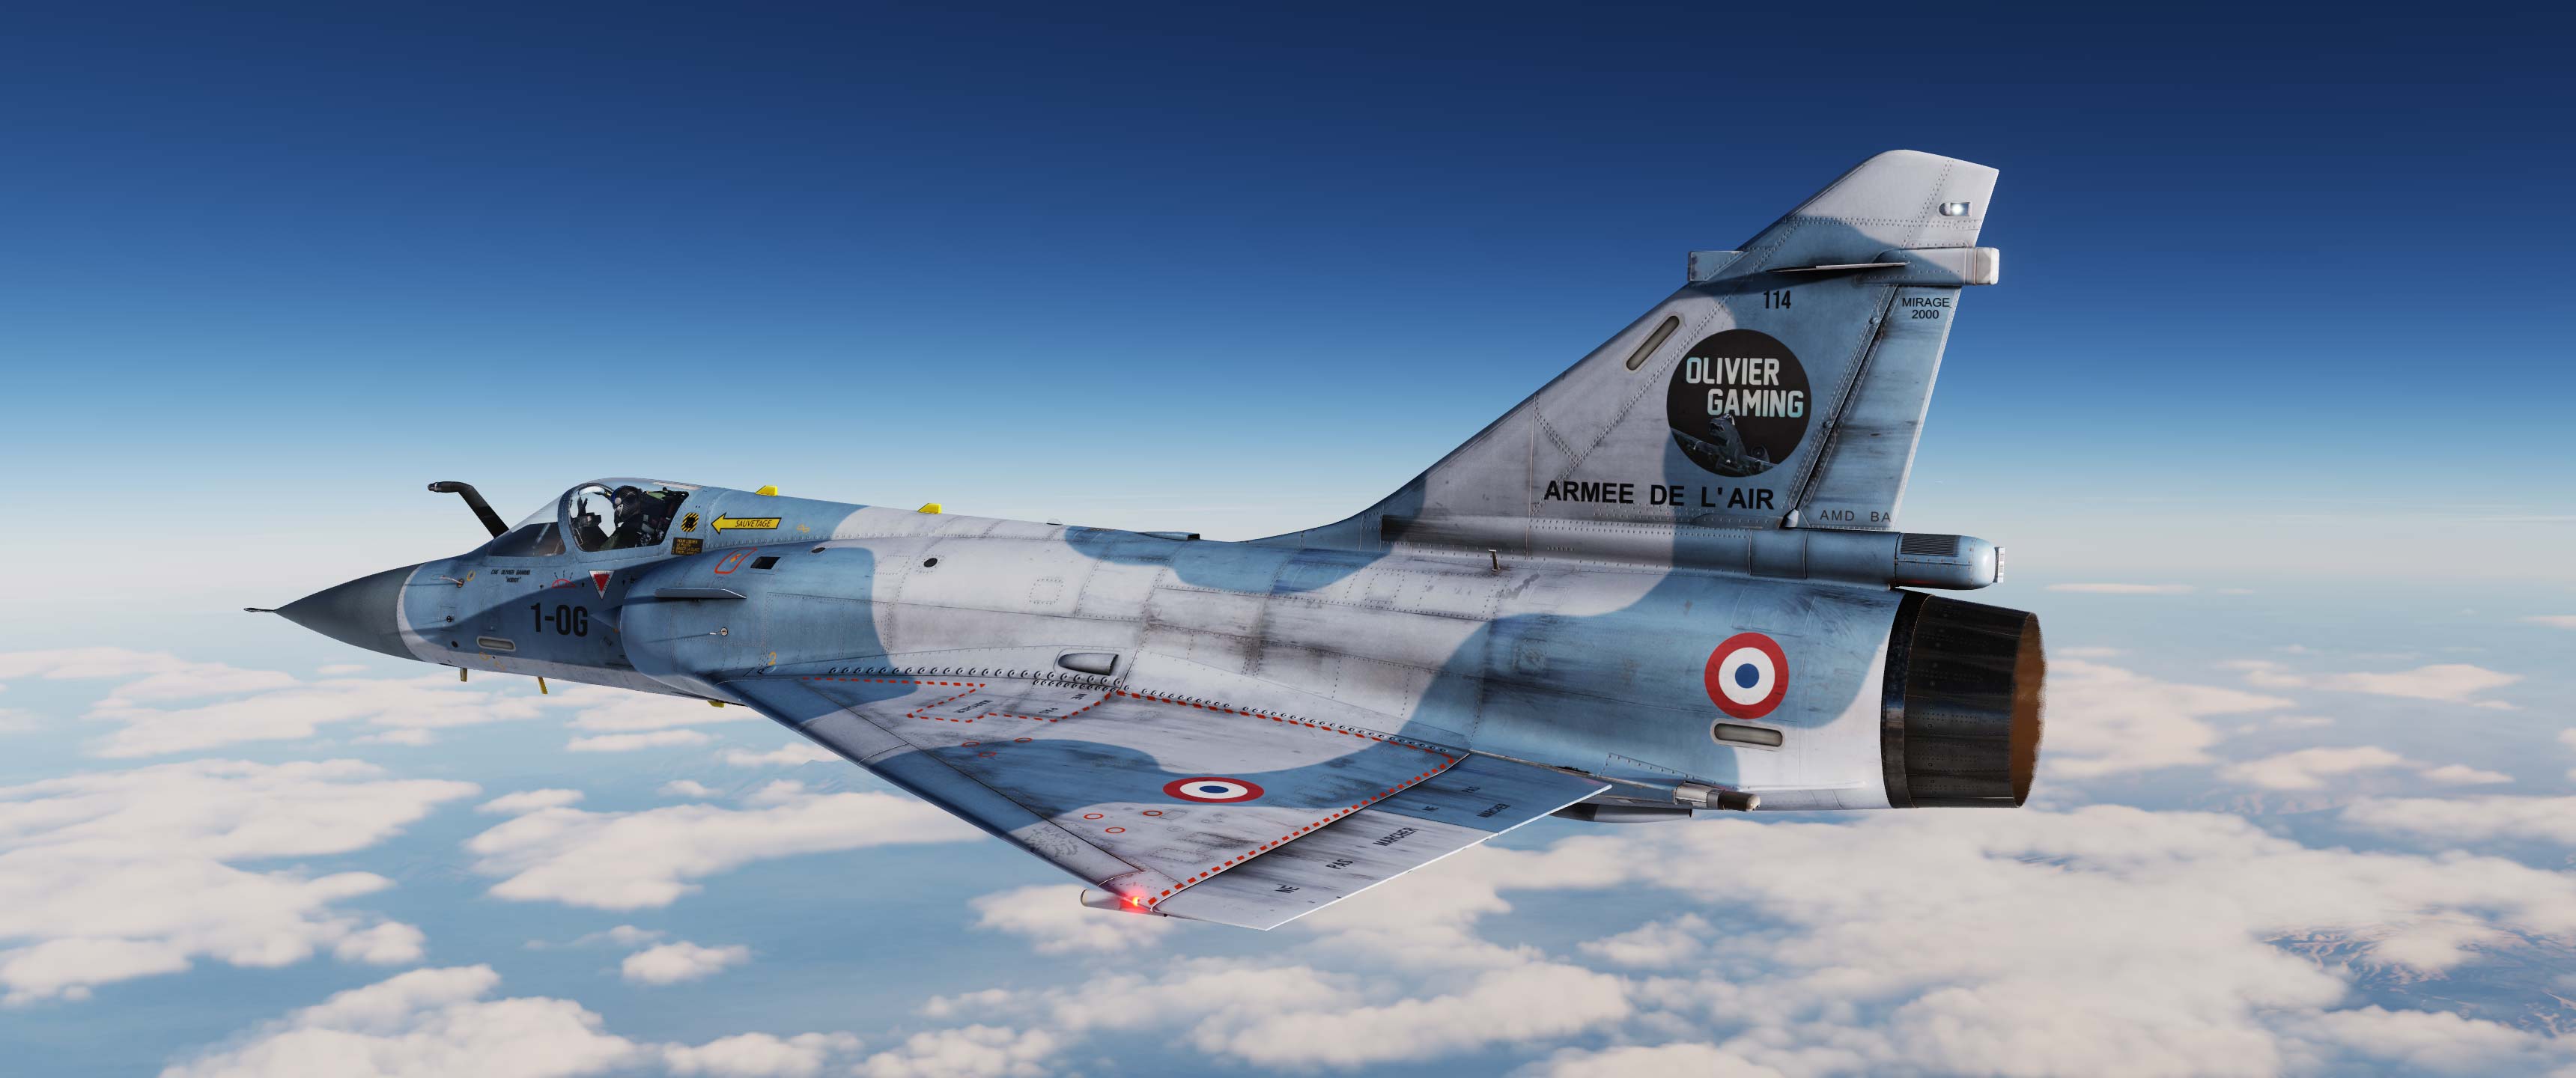 RIP Olivier Gaming "HODGY", un Mirage 2000 pour te rendre hommage...